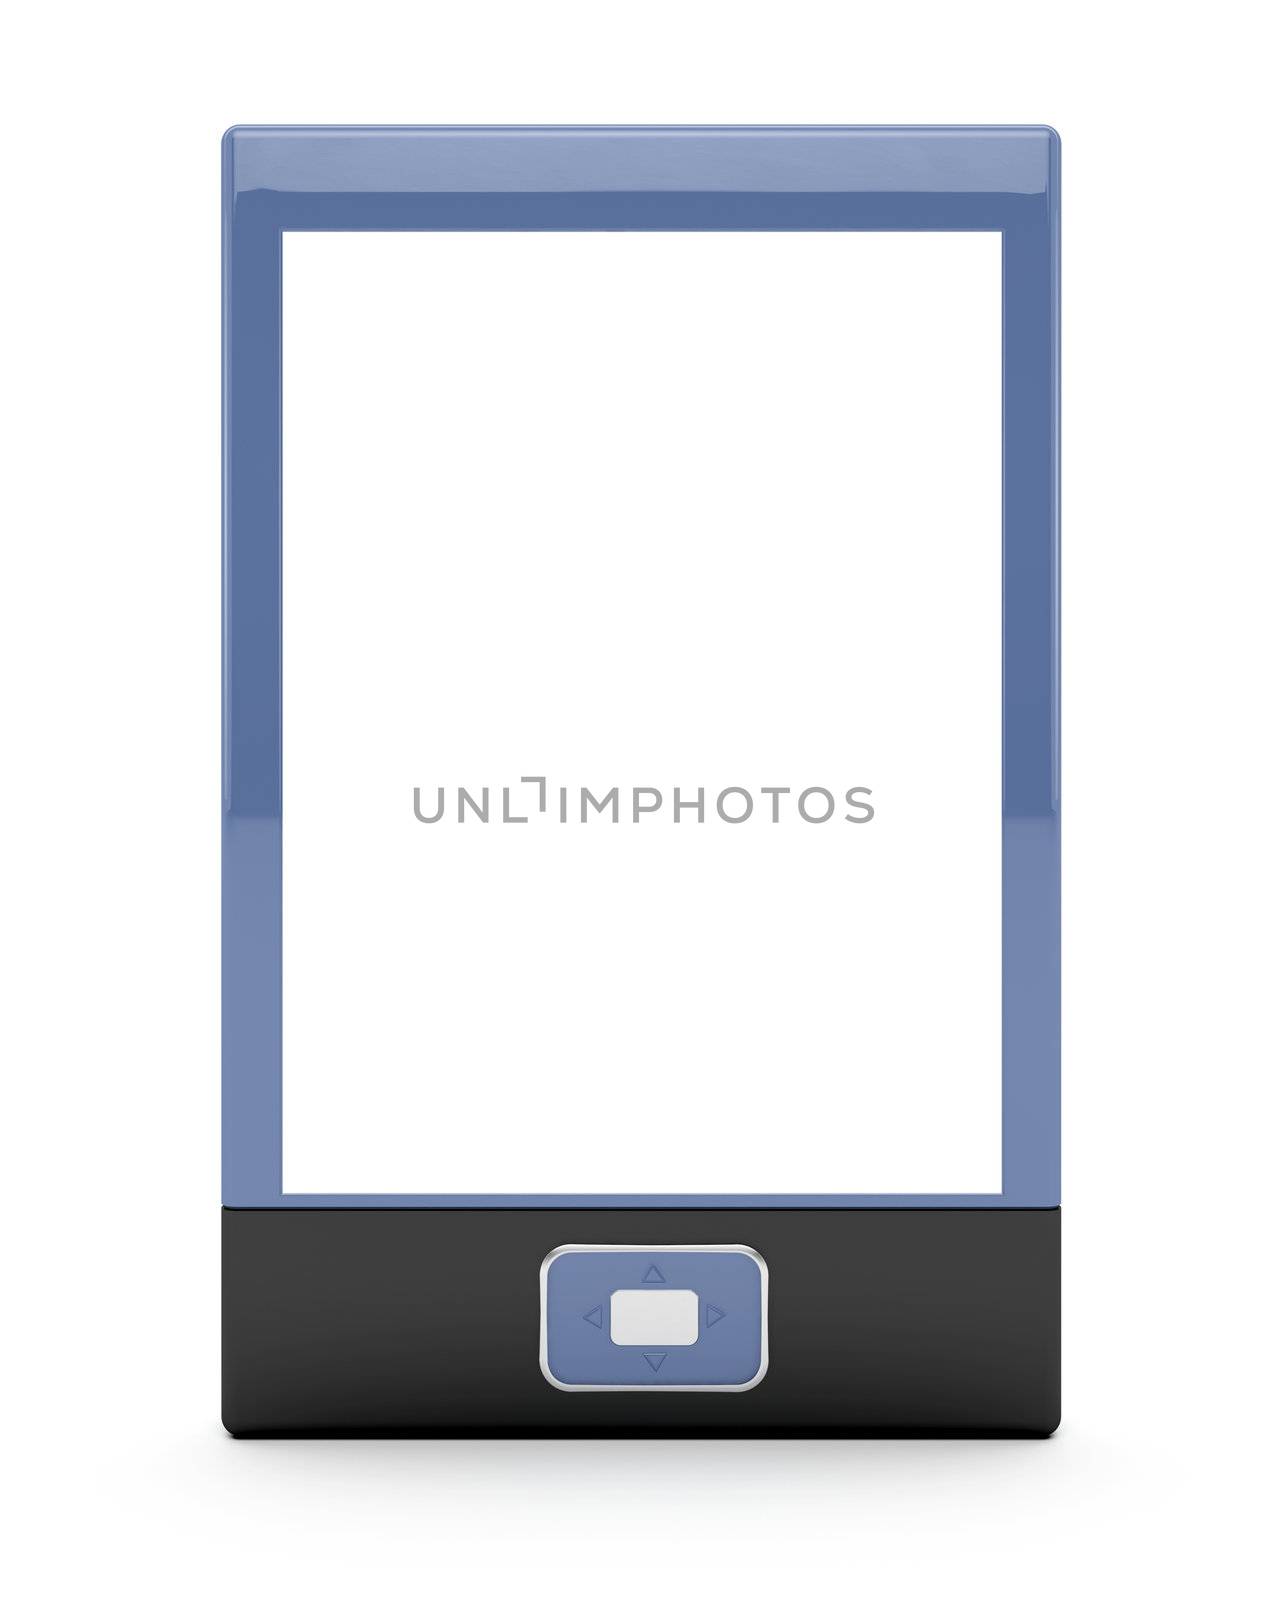 E-book reader with empty screen on white background. 3d image.